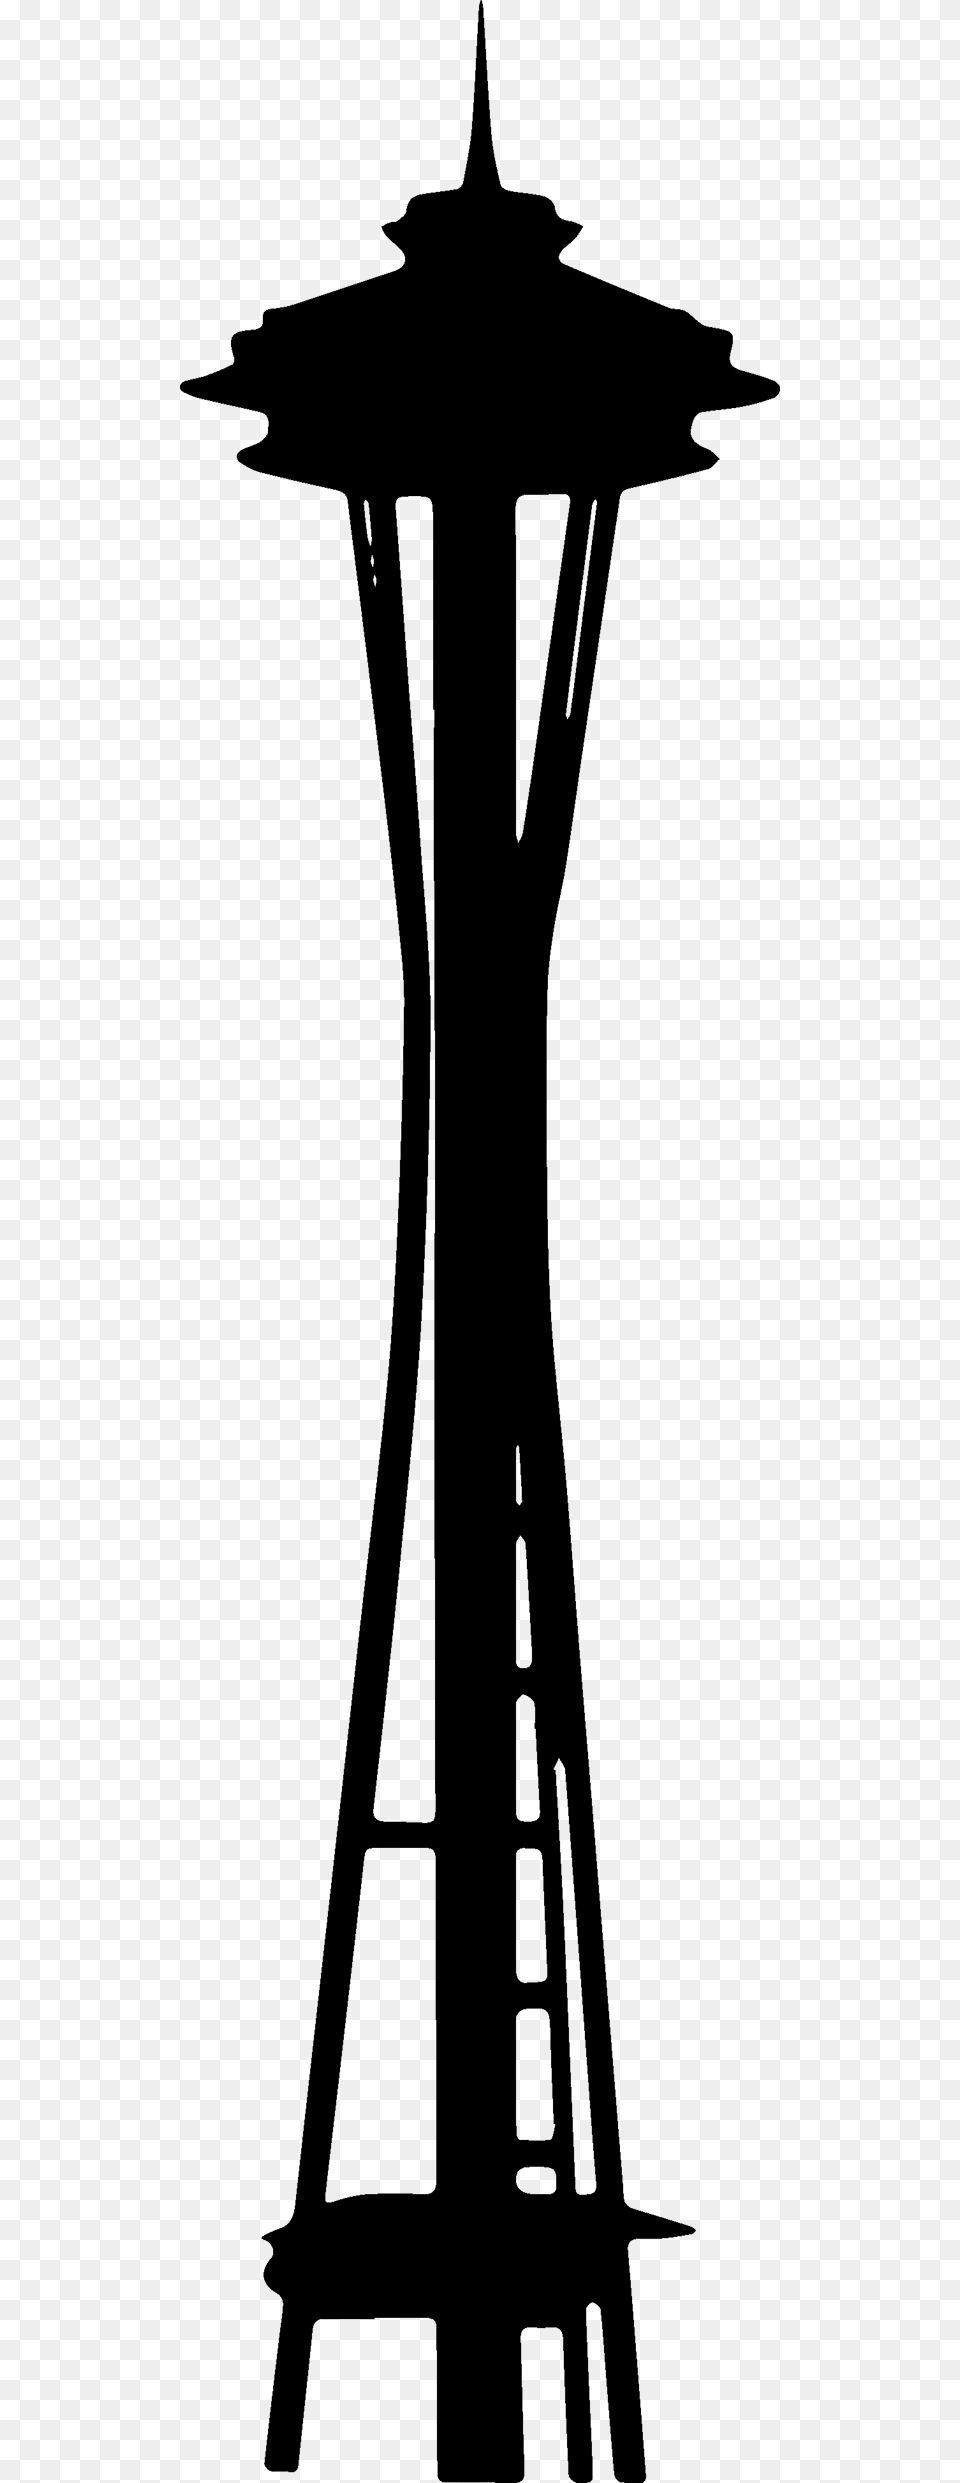 Space Needle Silhouette Free Transparent Images With Cliparts, Nature, Night, Outdoors, Lighting Png Image